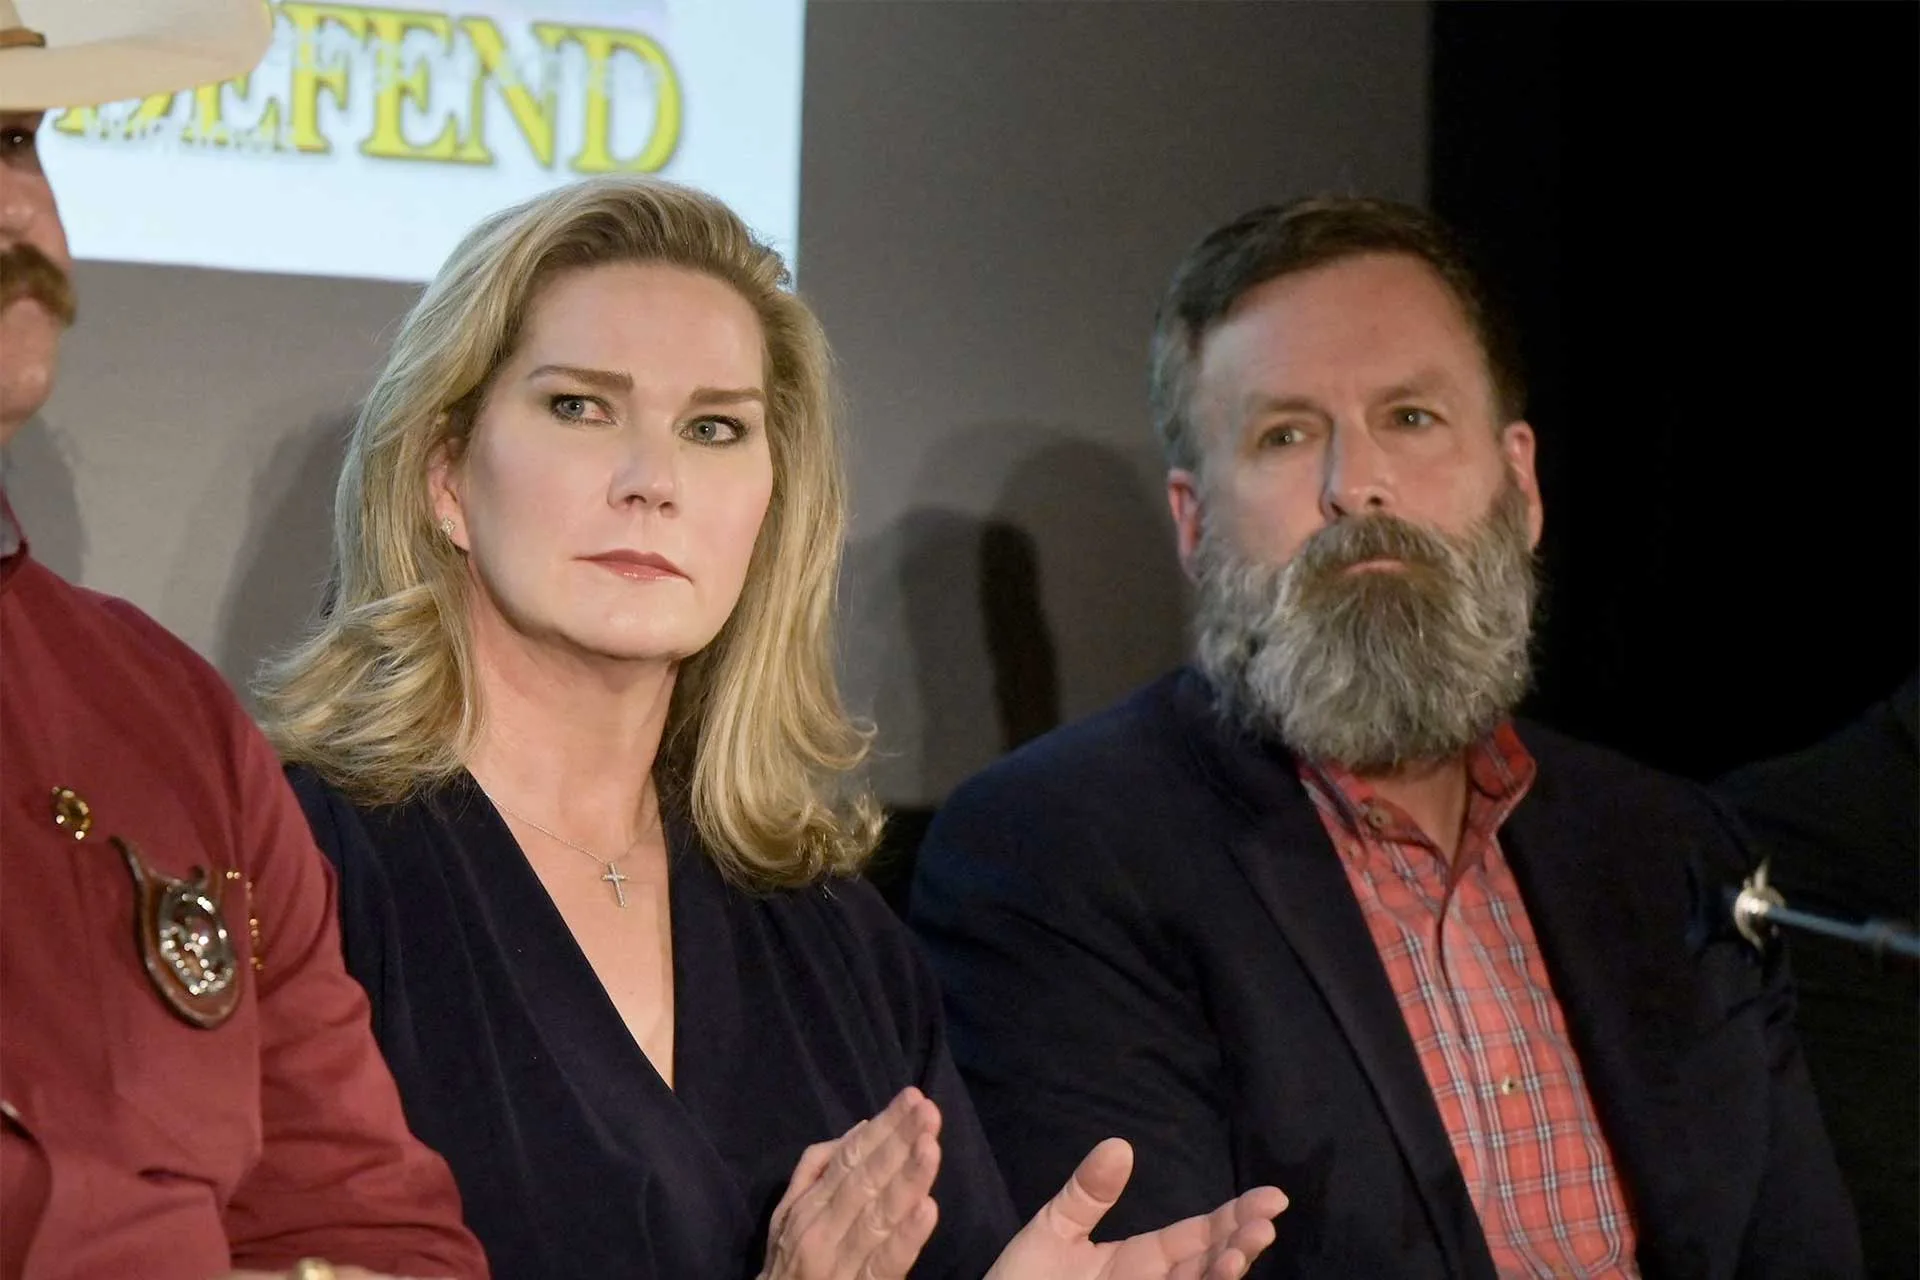 Catherine Engelbrecht, center, founder of True the Vote, and Gregg Phillips, right, at a news conference in Las Vegas Credit: Bridget Bennett/Reuters